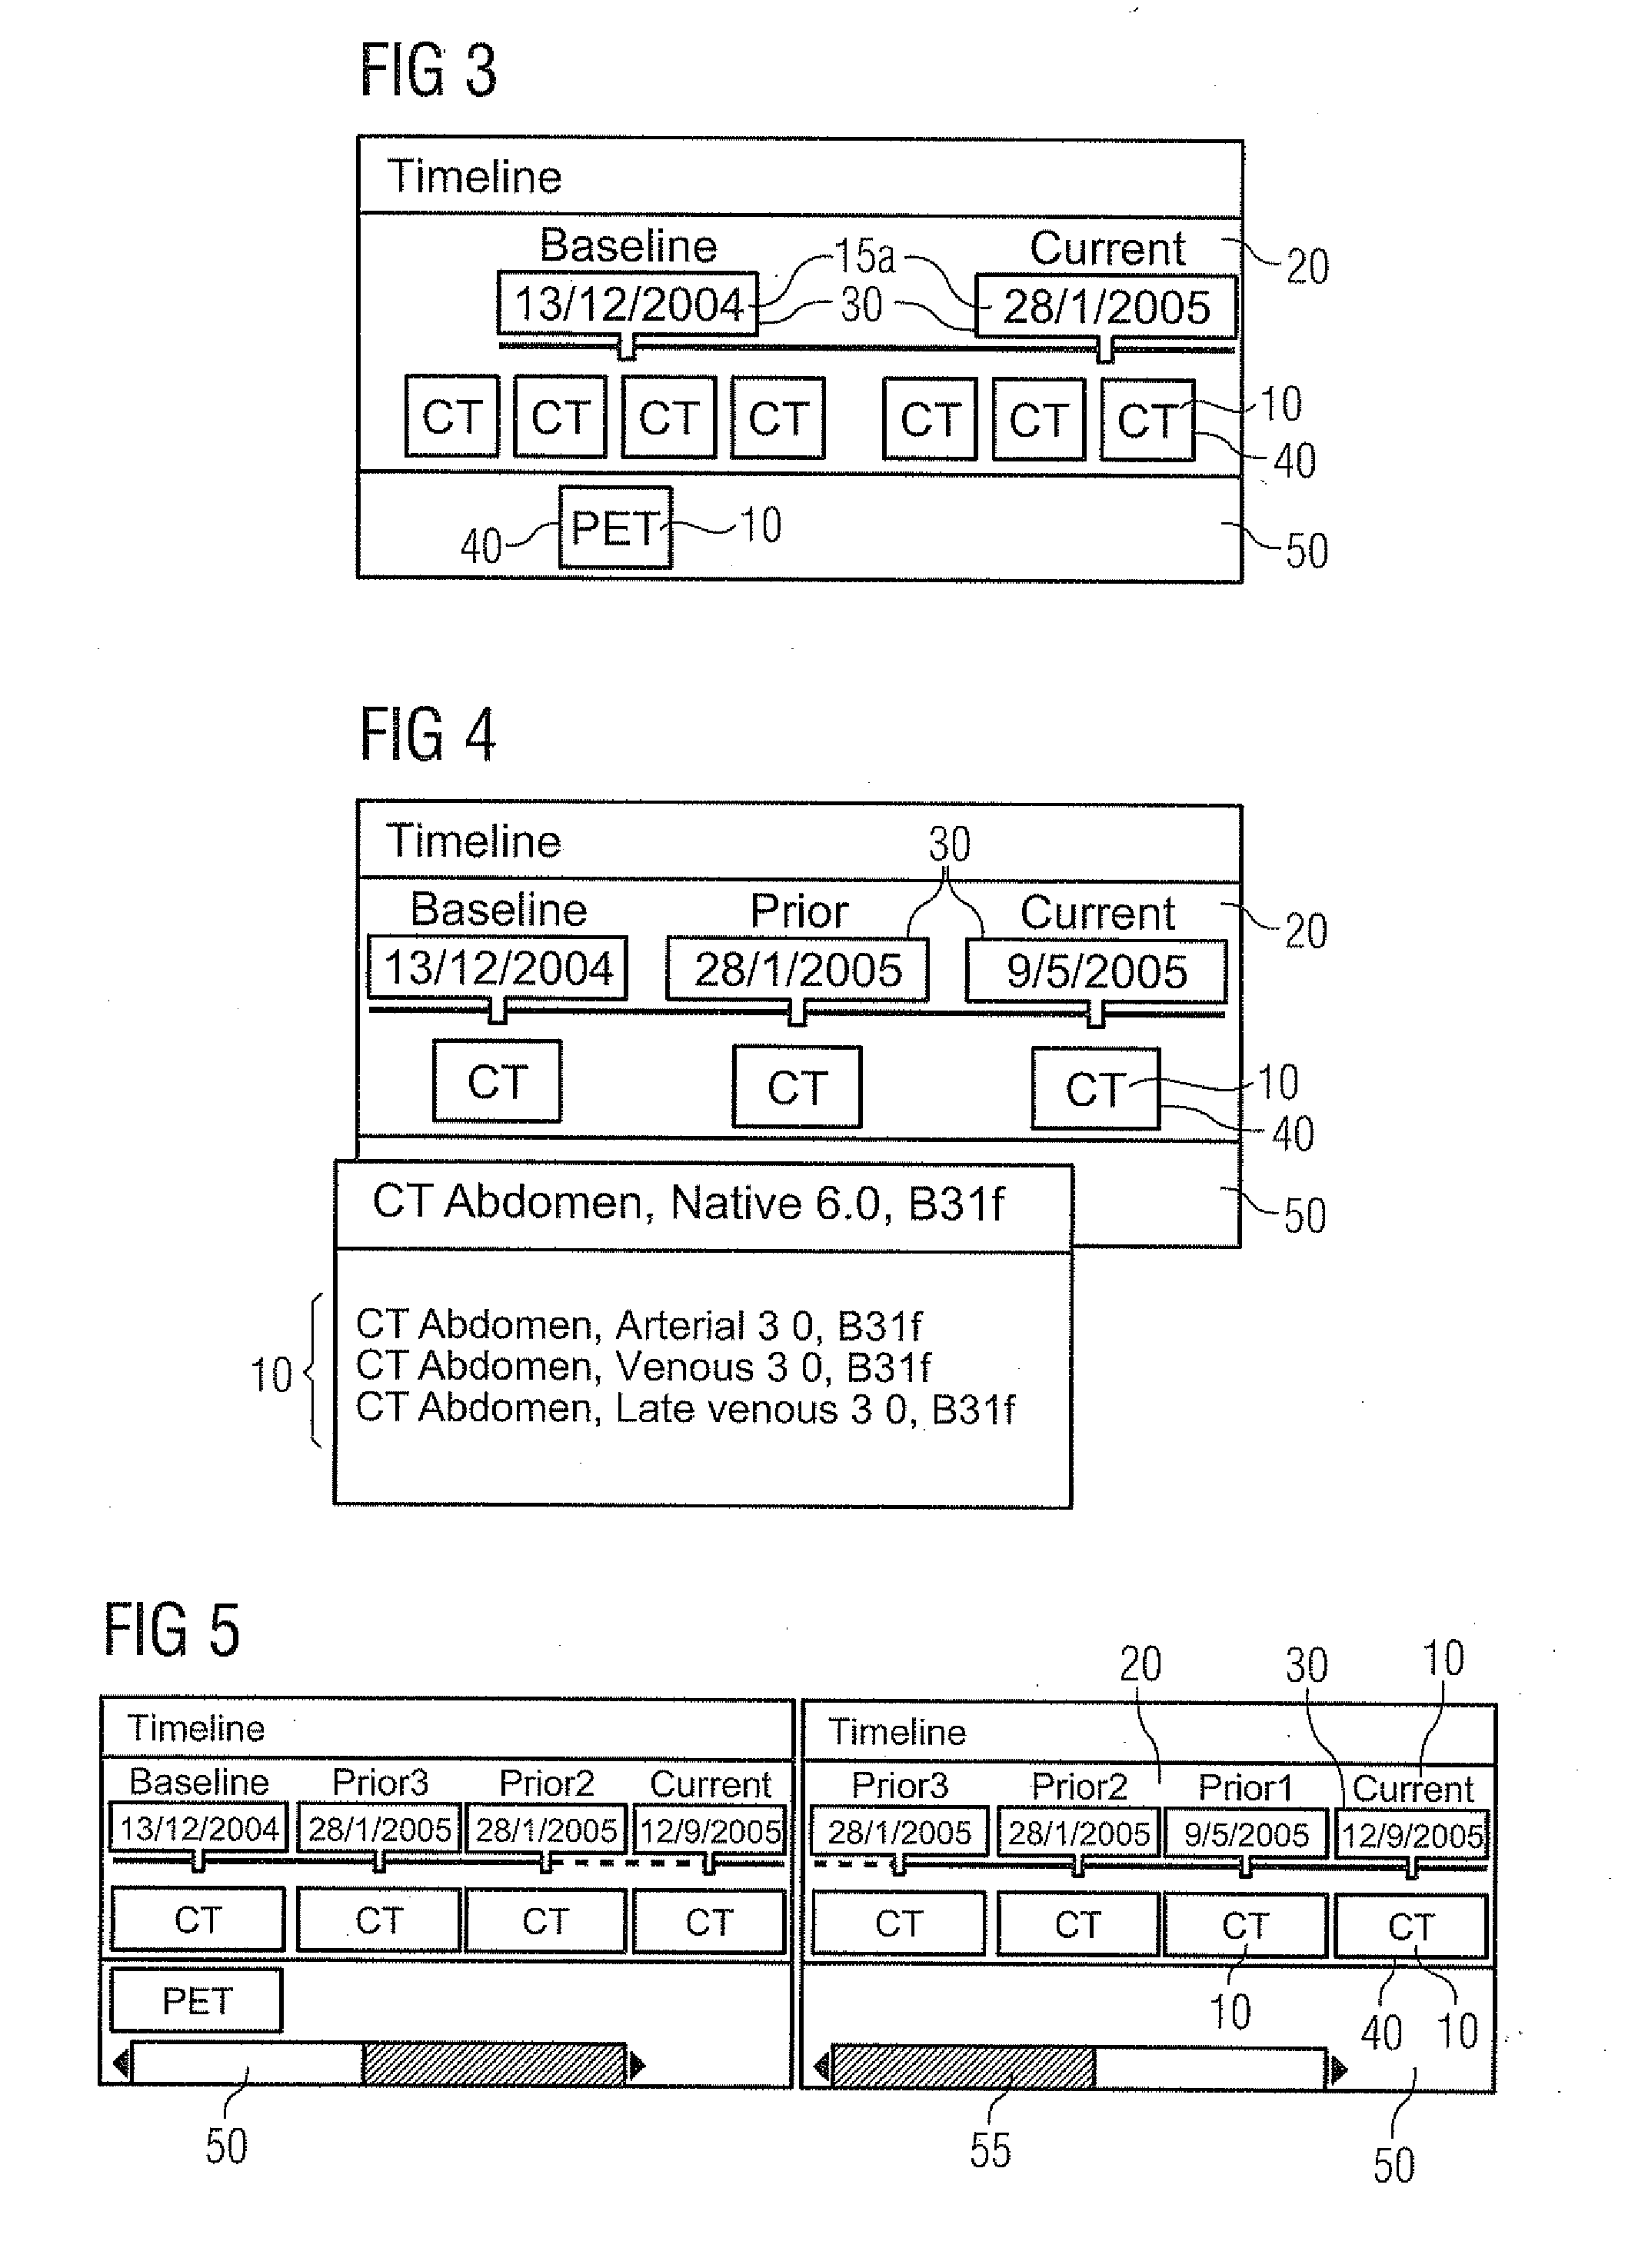 Graphical interface for the management of sequential medical data